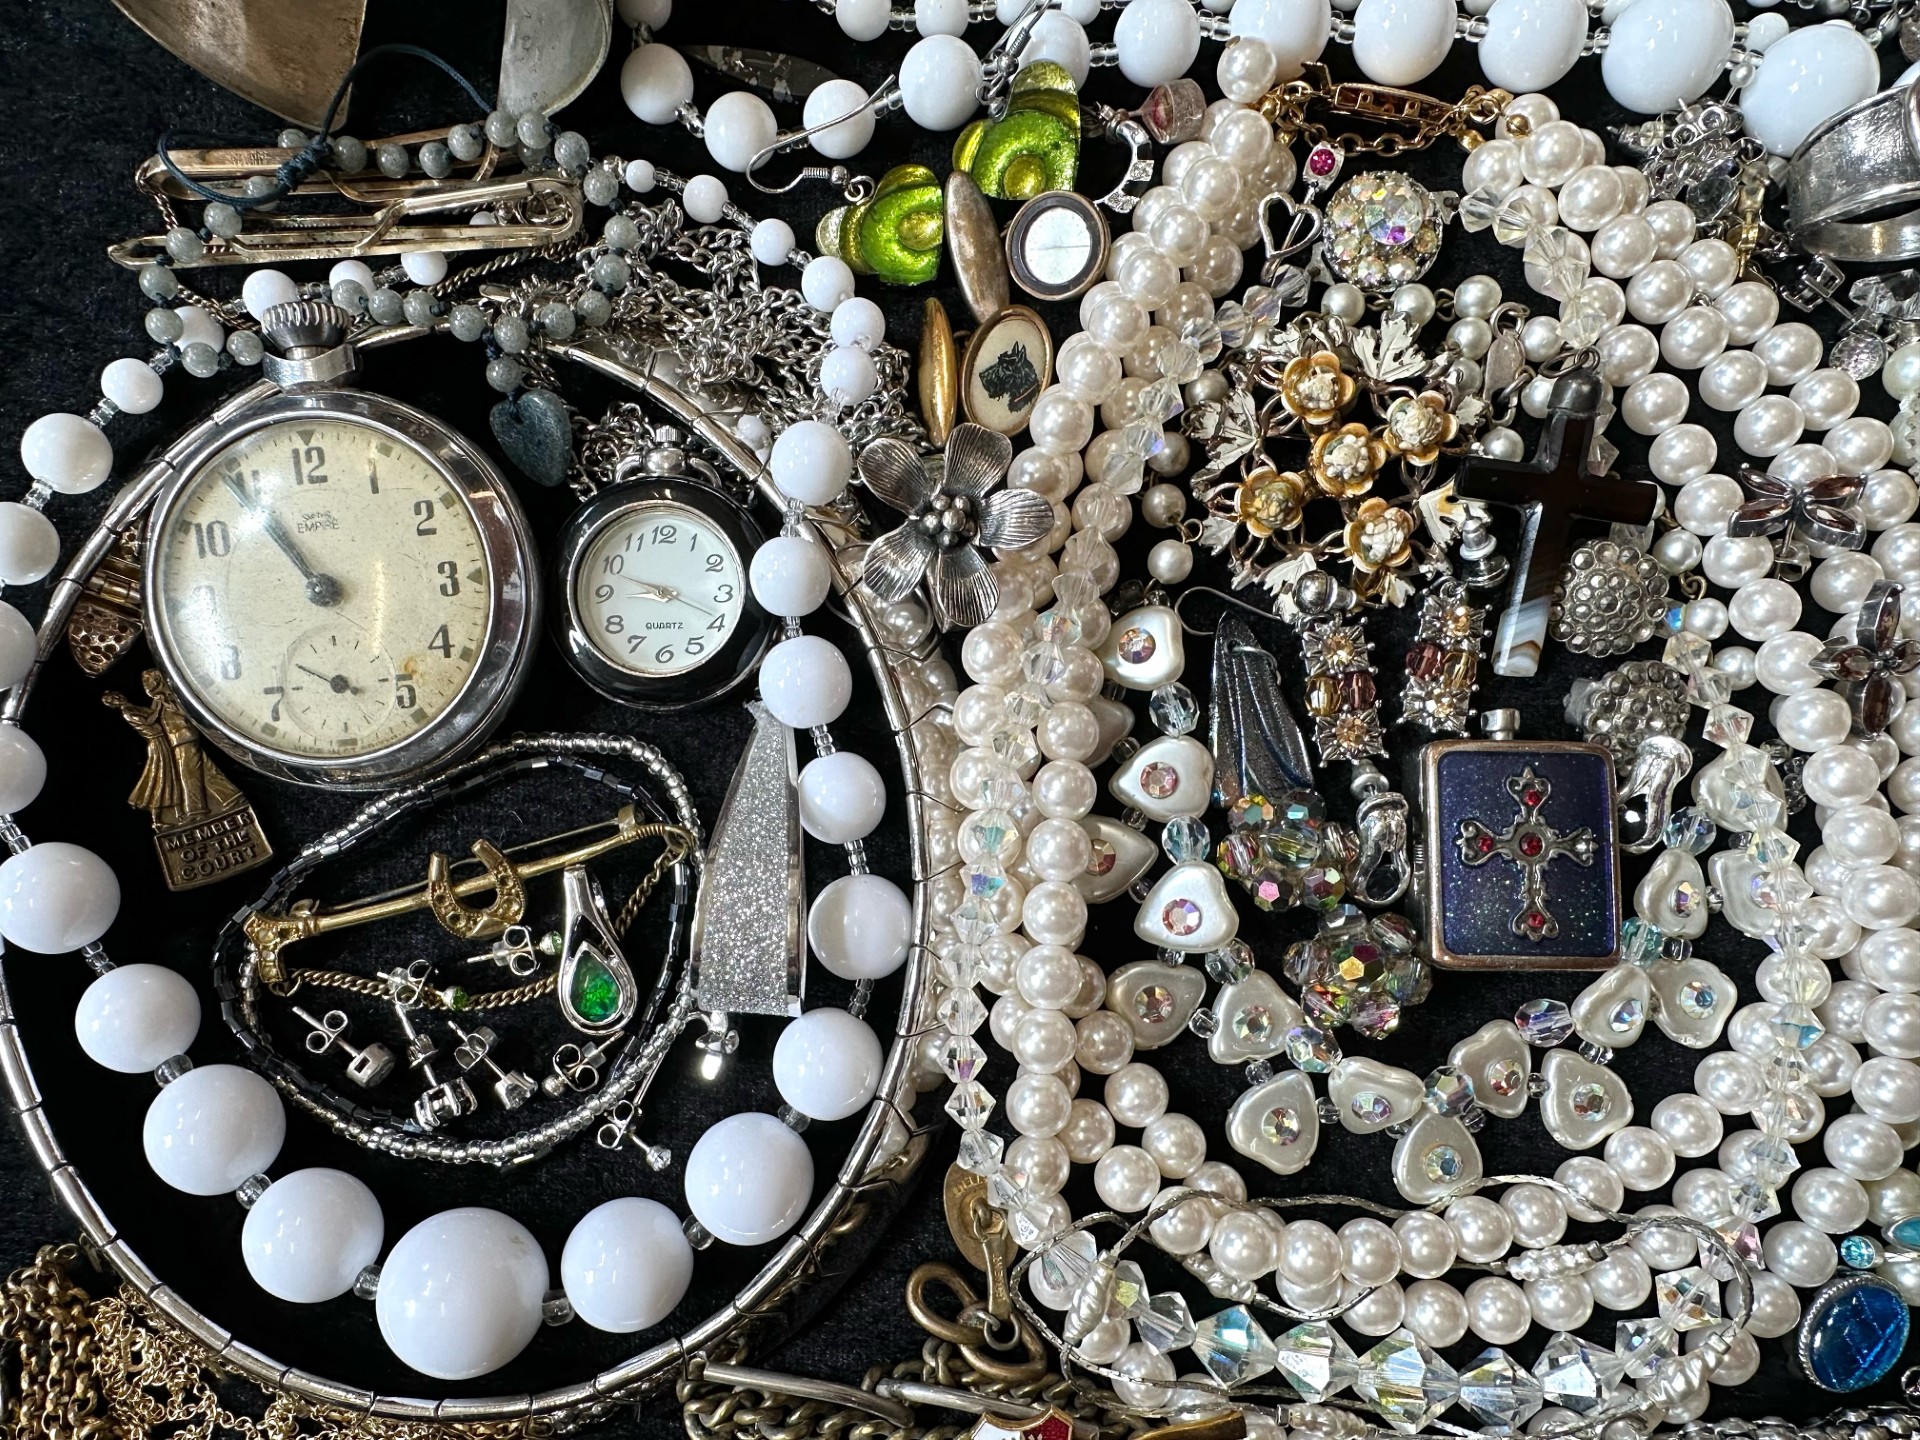 Collection of Costume Jewellery, comprising bracelets, bangles, brooches, pearls, chains, beads, - Image 2 of 3